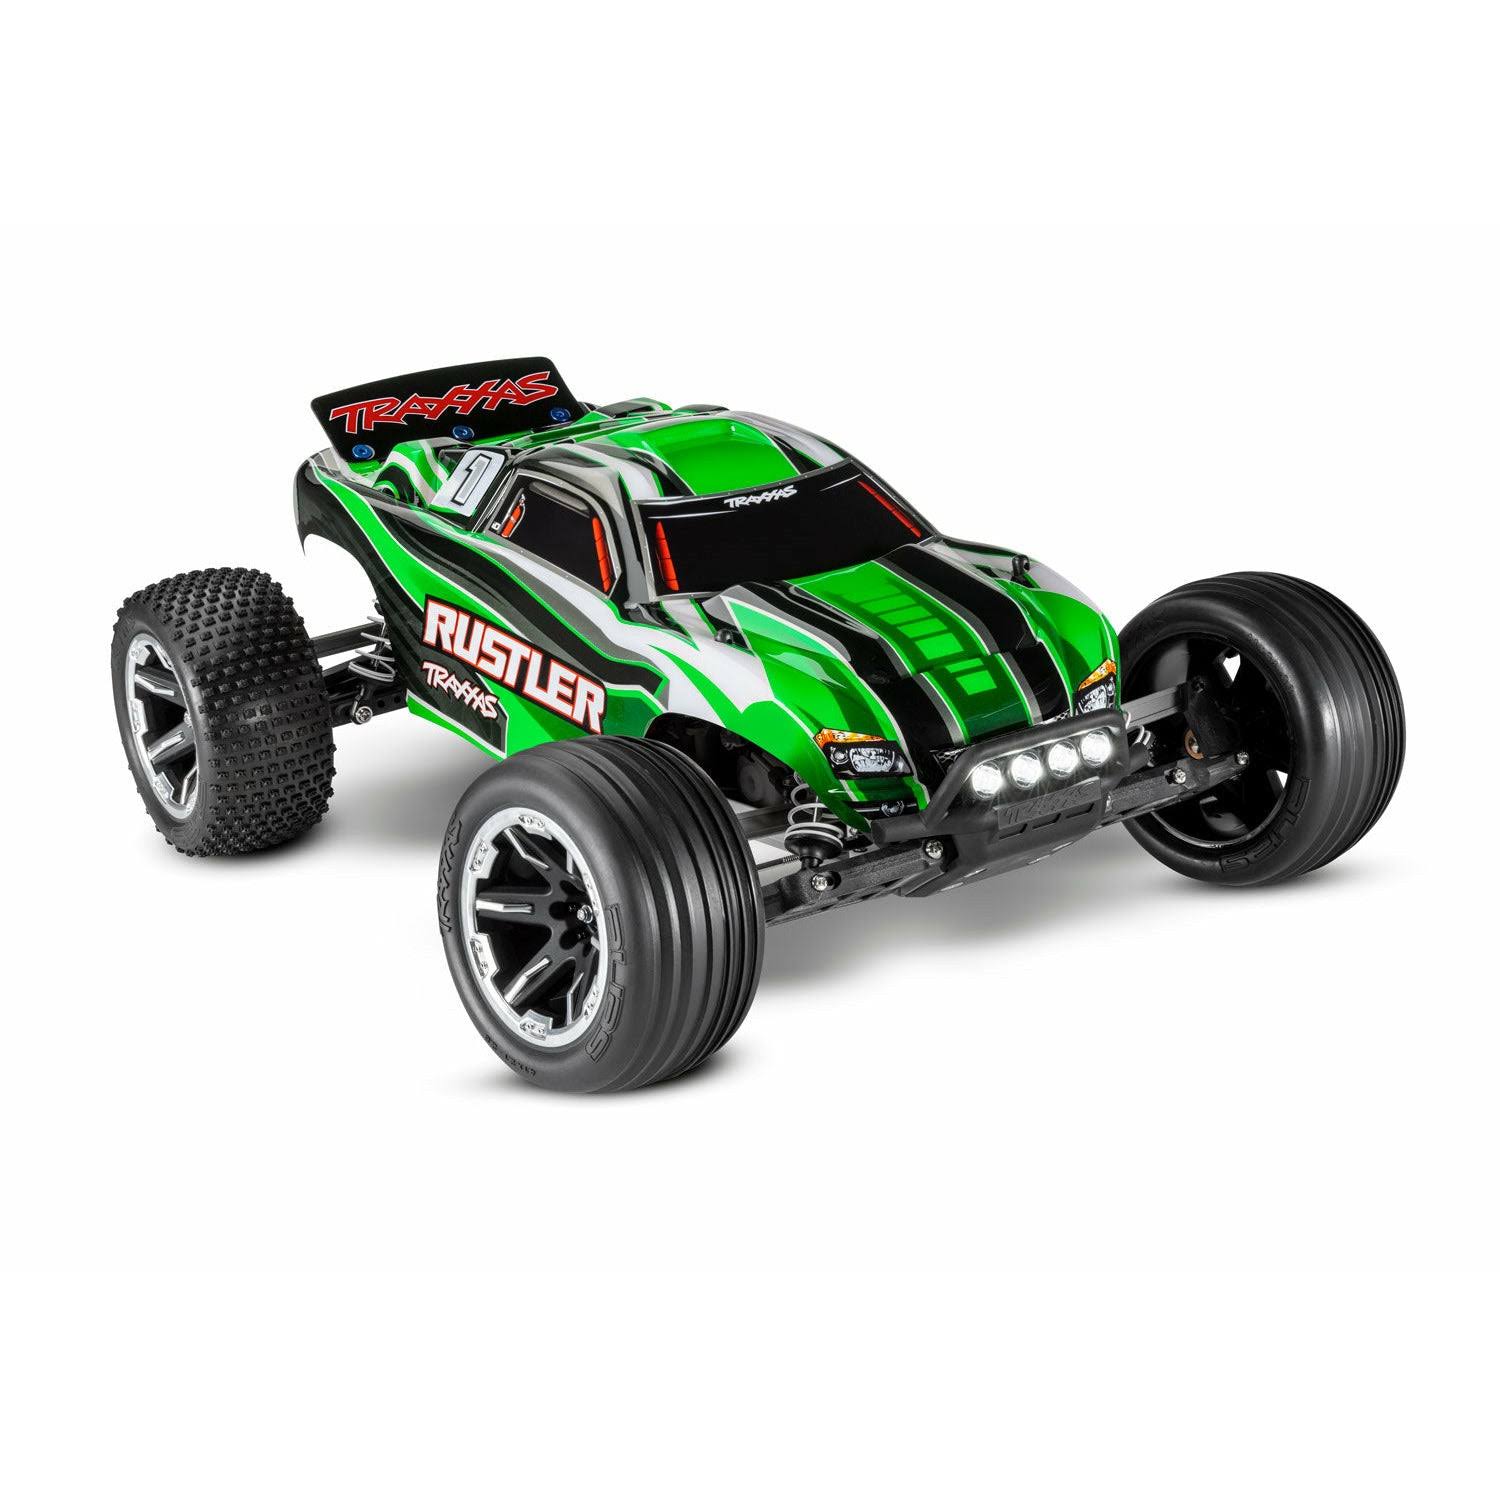 Traxxas 1/10 Rustler 2WD RTR Stadium Truck with LED Lights Green